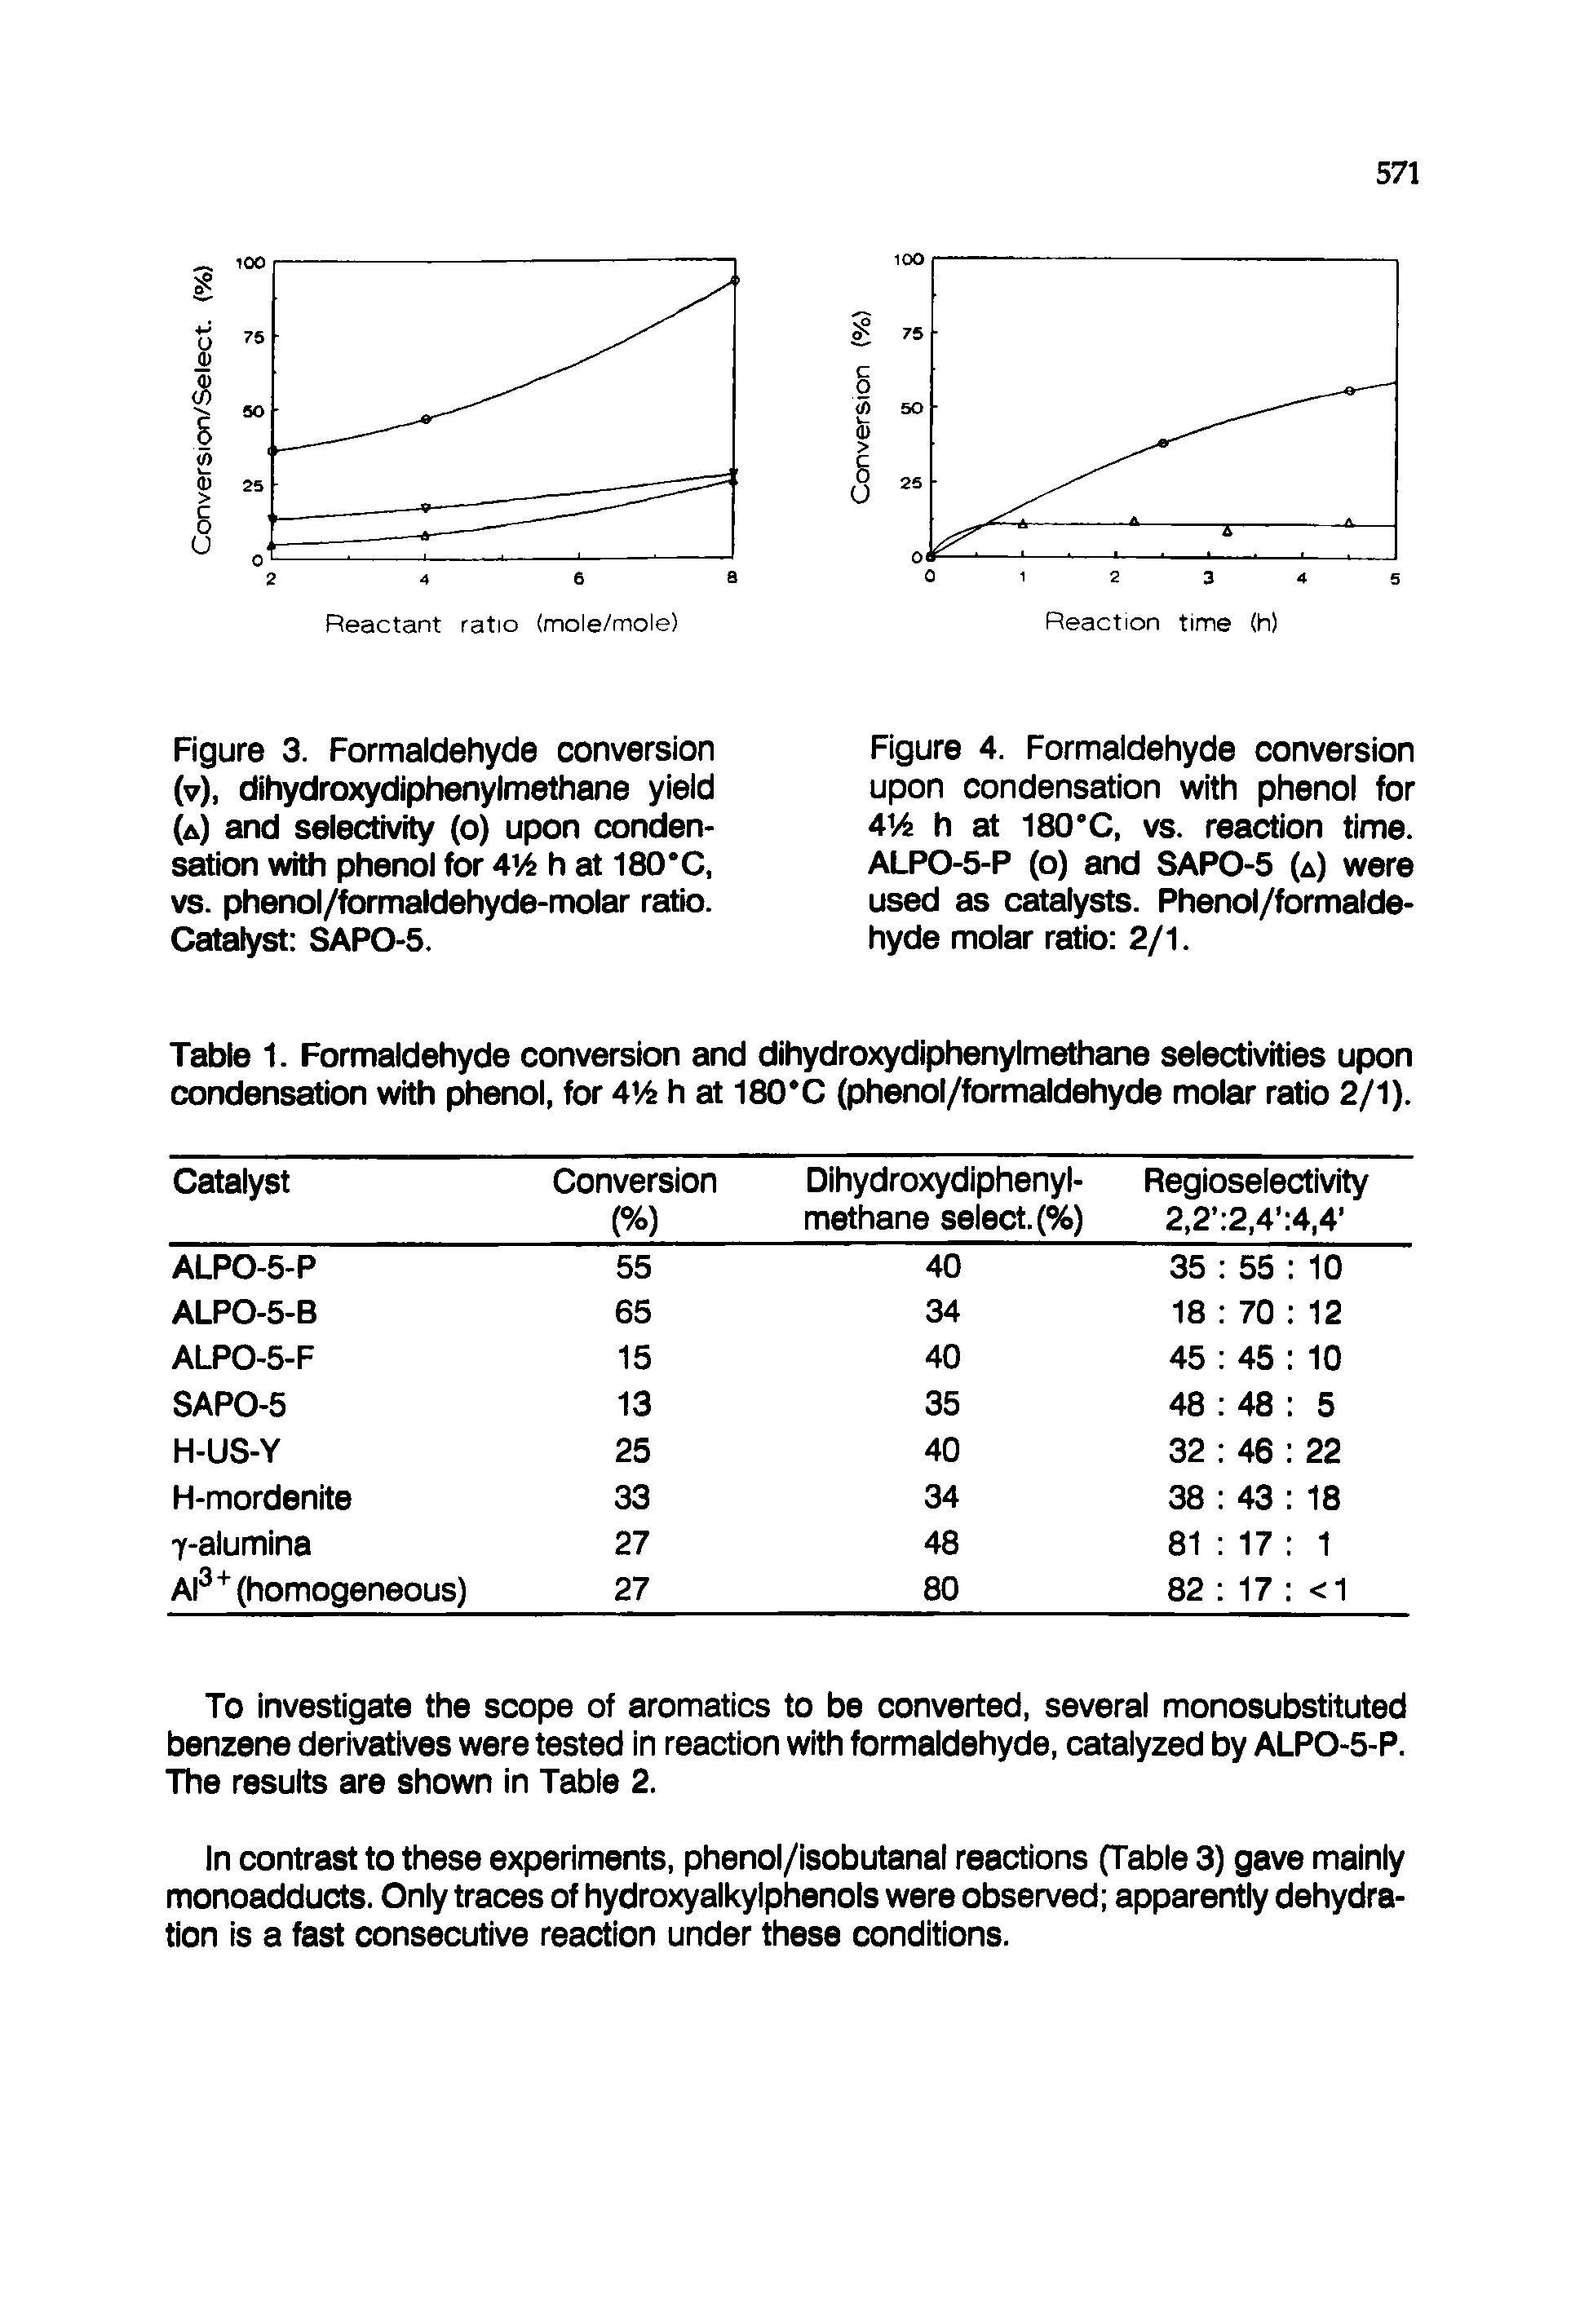 Table 1. Formaldehyde conversion and dihydroxydiphenylmethane selectivities upon condensation with phenol, for 4Vfe h at 180 C (phenol/formaldehyde molar ratio 2/1).